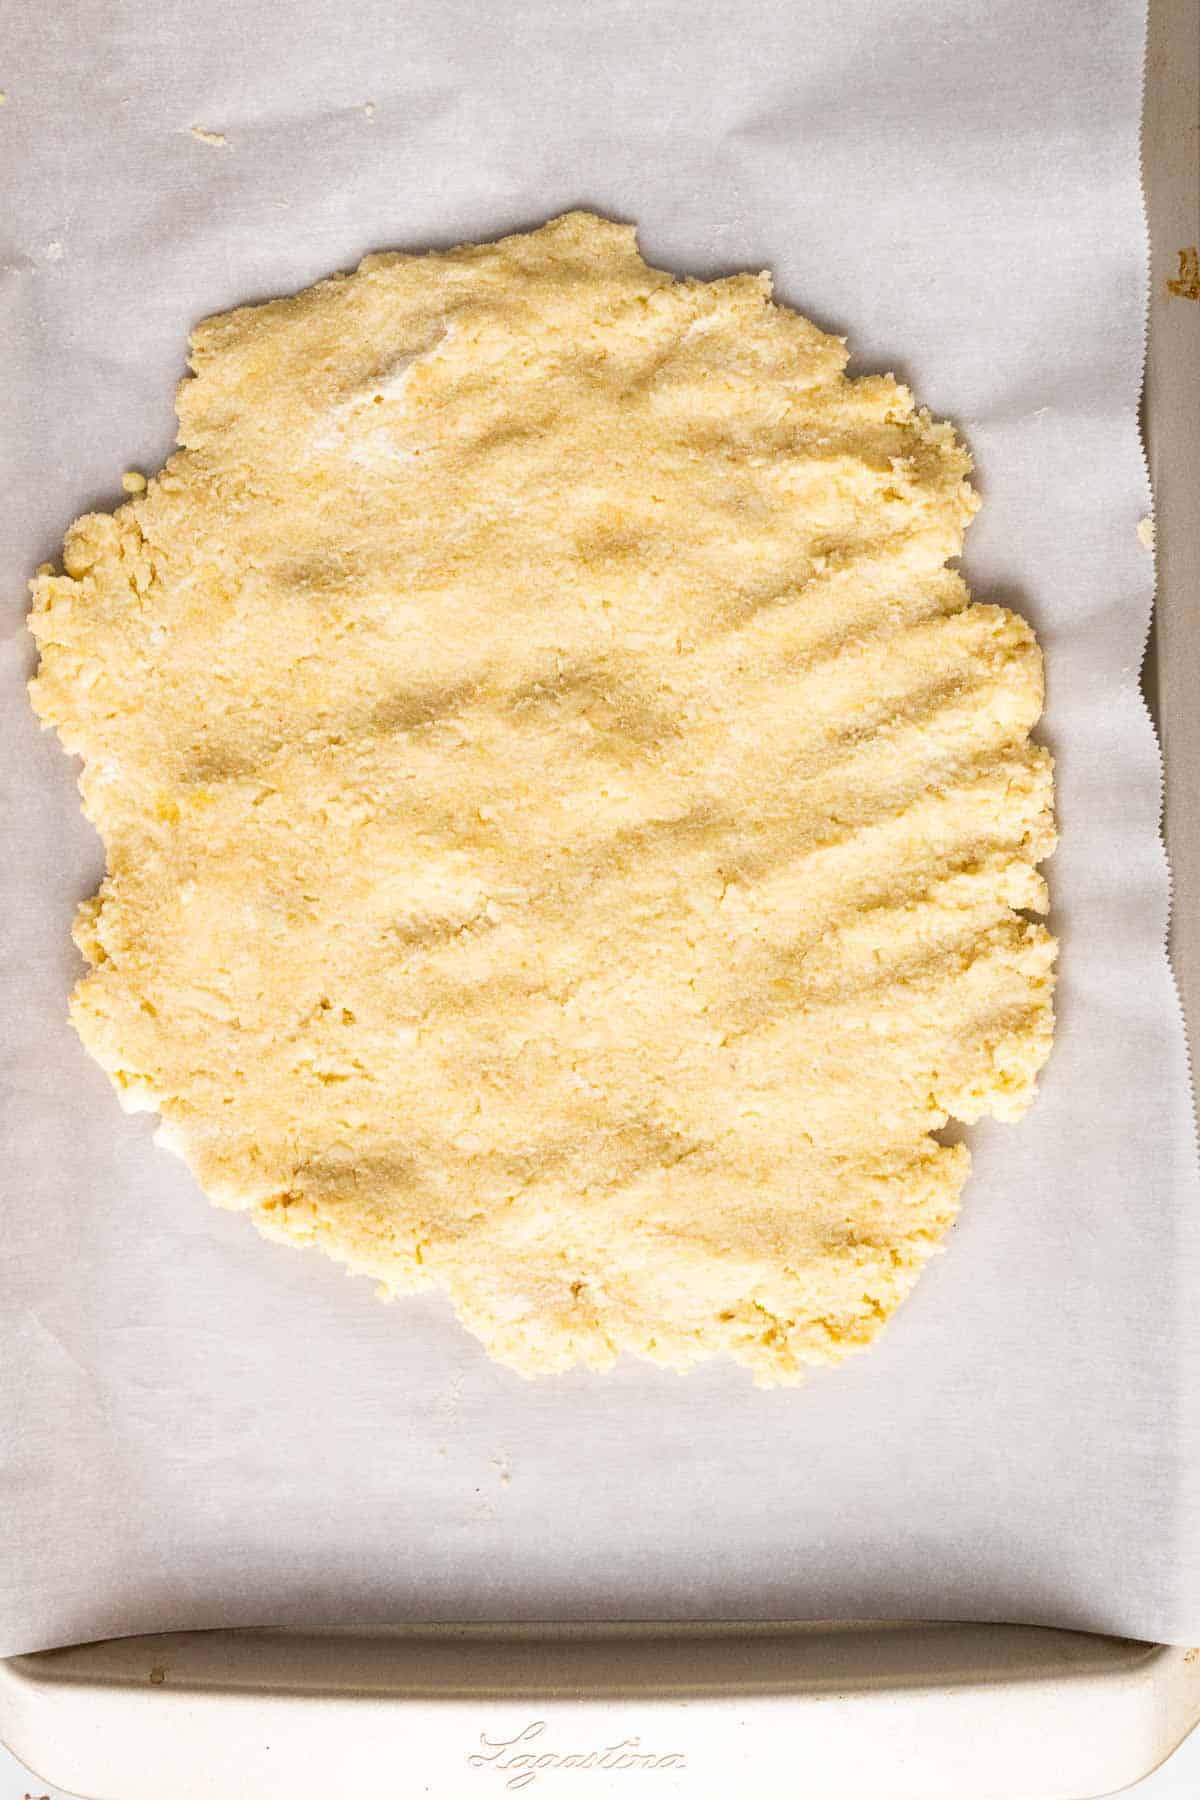 Dough flattened into a rough circle on a baking sheet lined with parchment paper, as seen from above